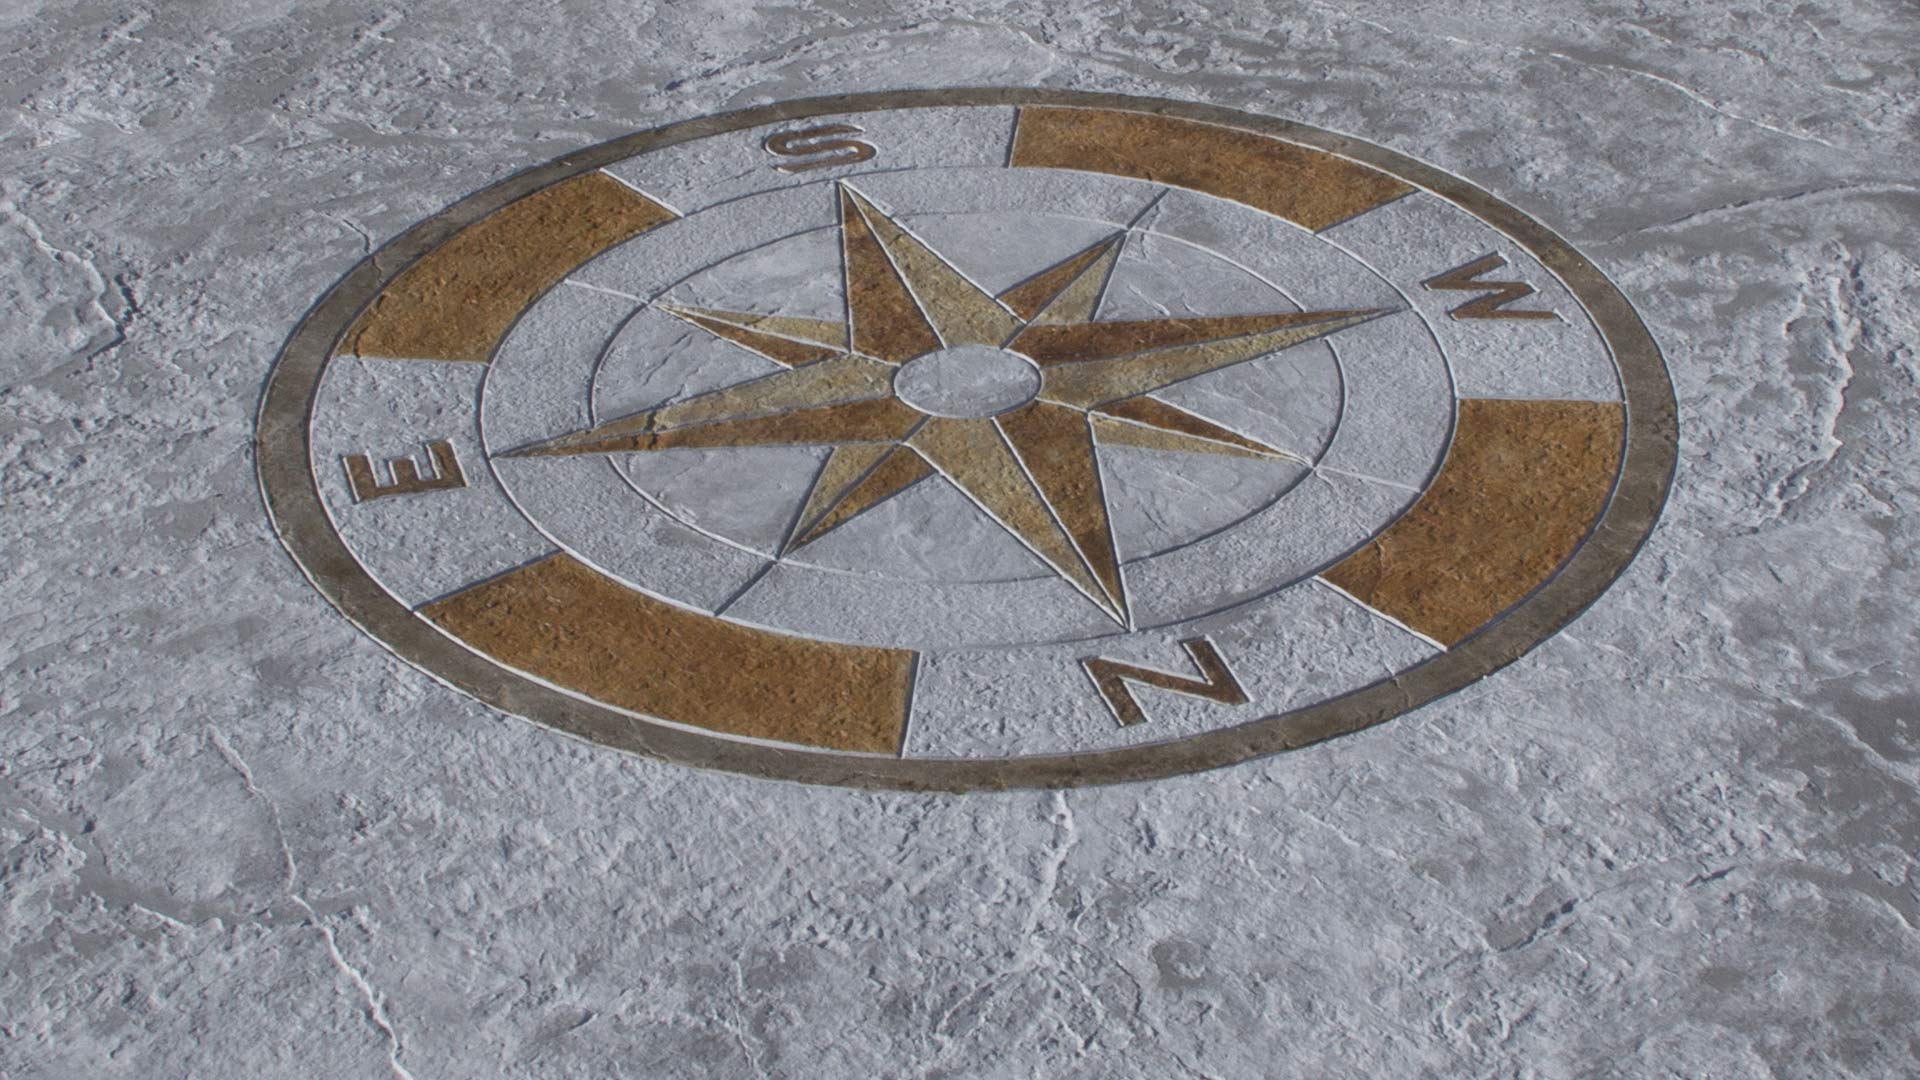 imprinted pavement with white and gold compass rose mould